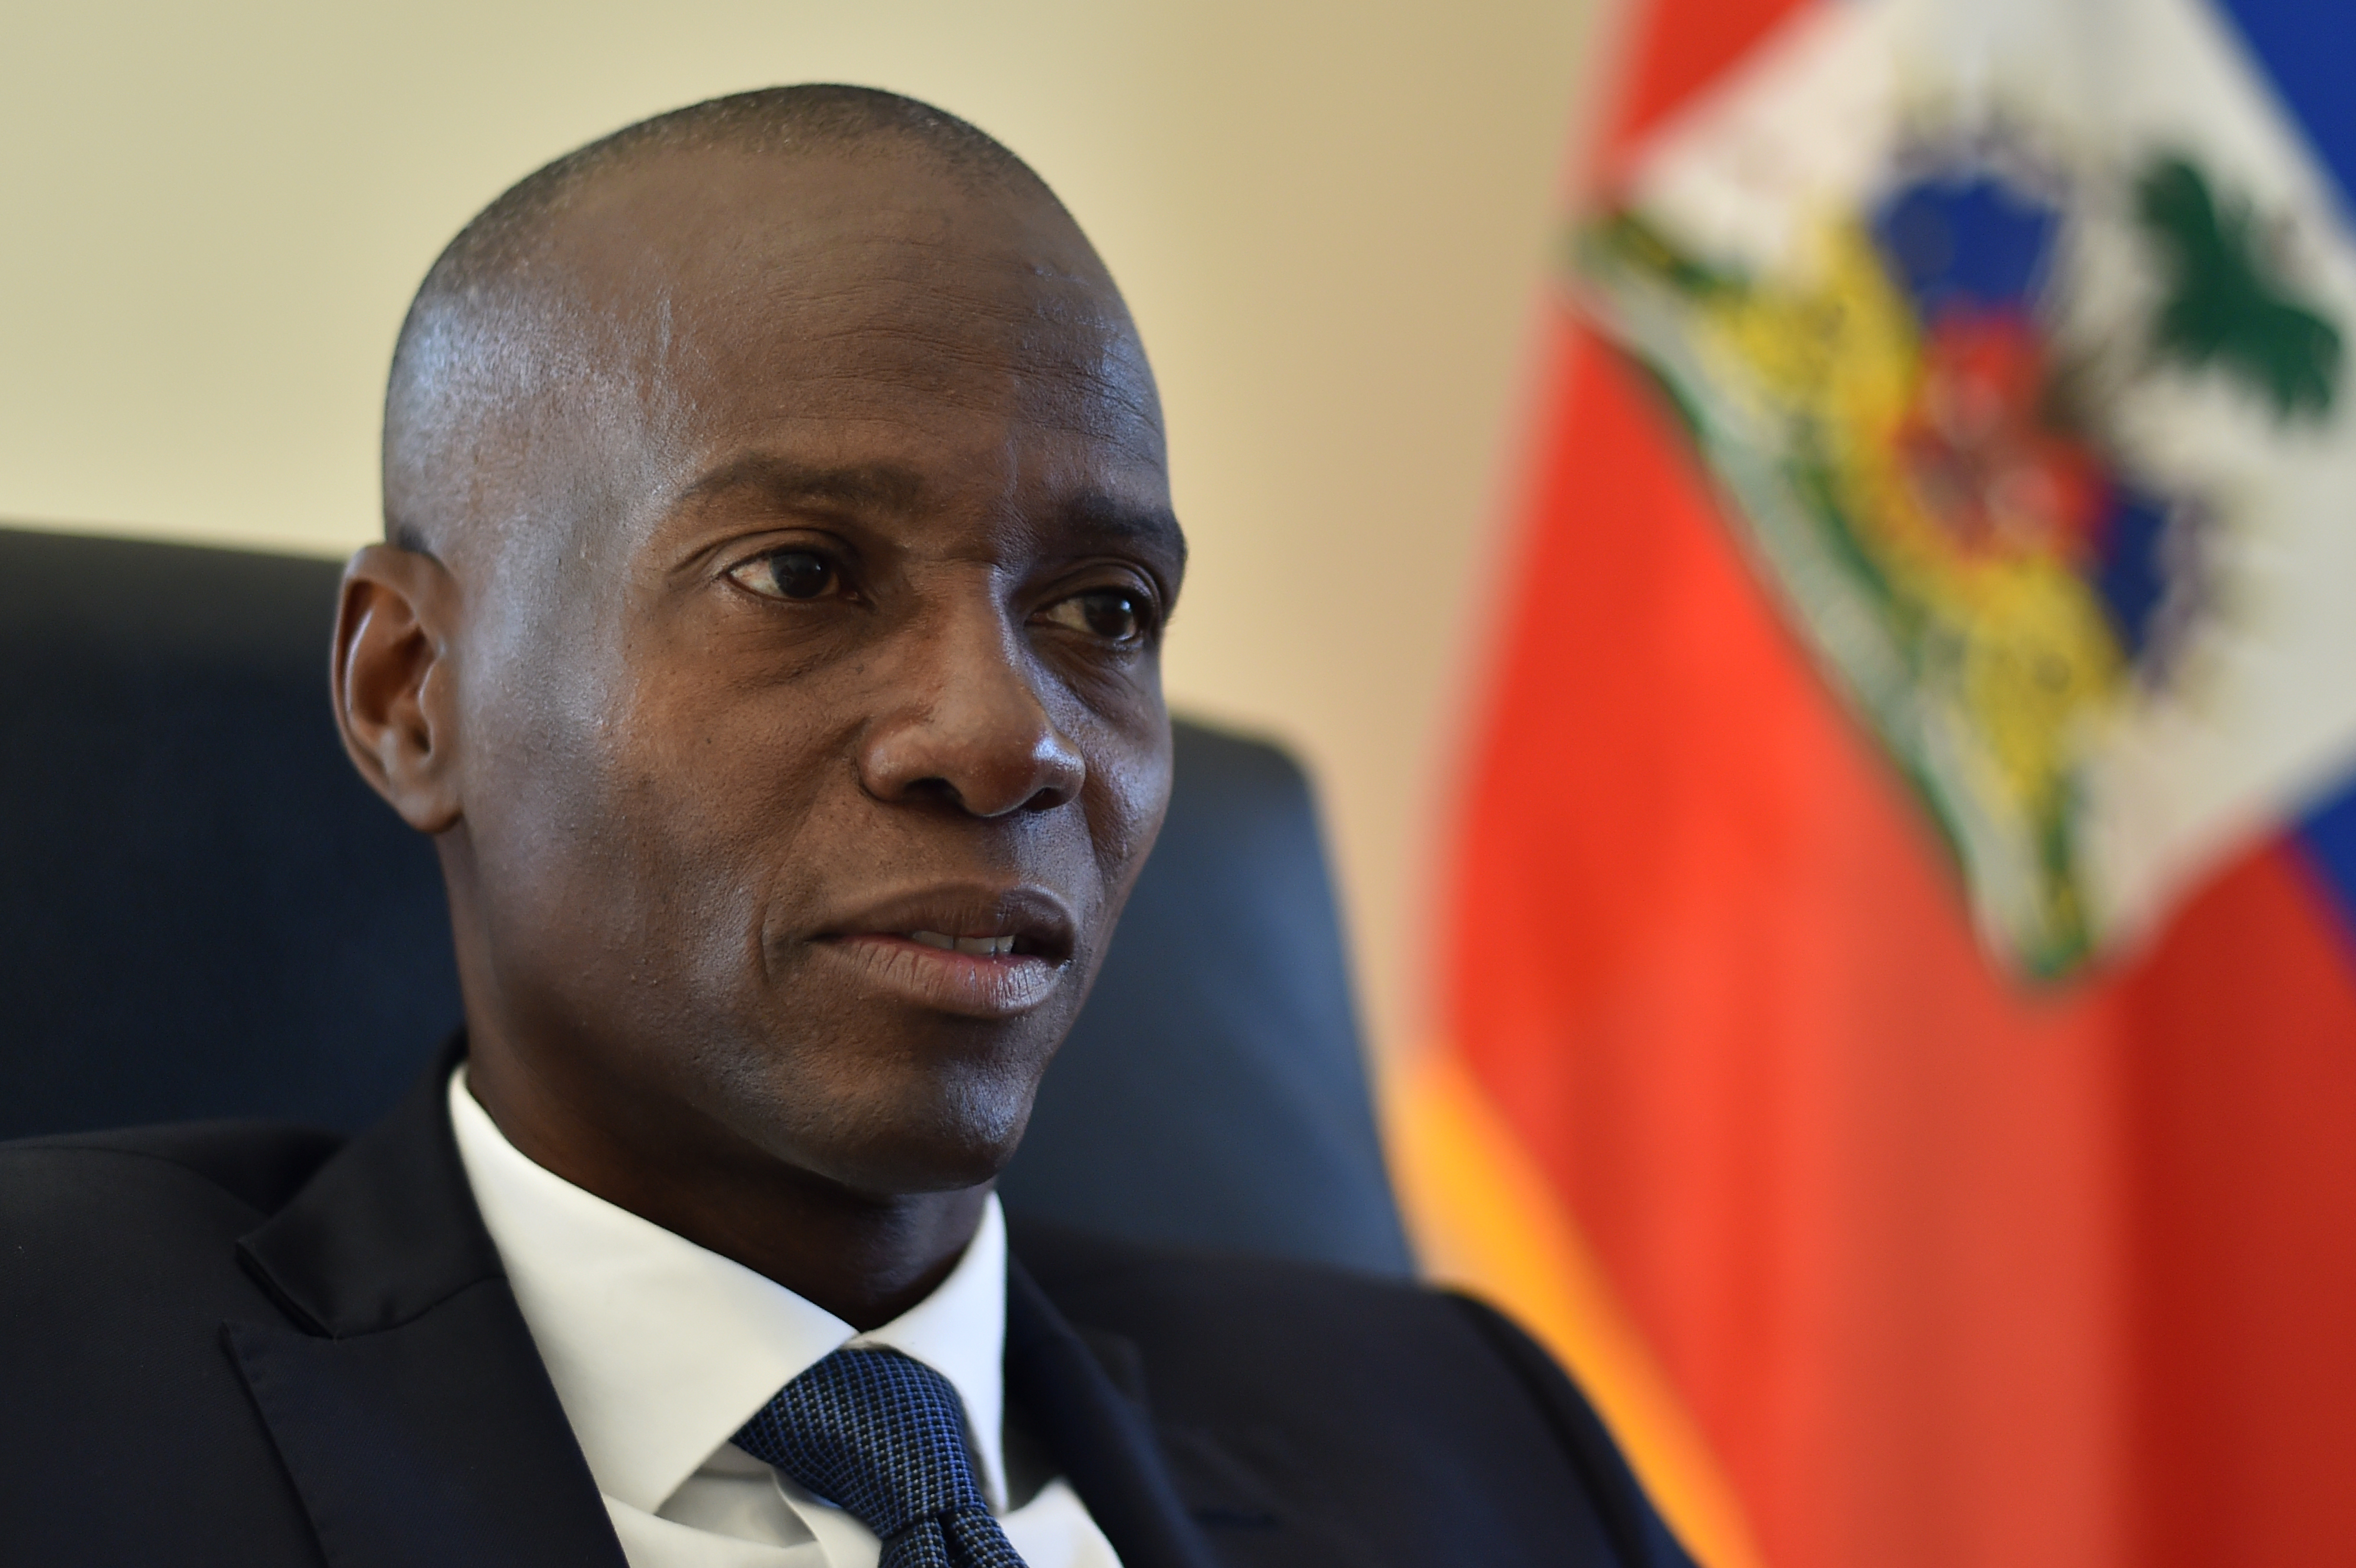 Jovenel Moise of PHTK political party, and new president of Haiti, according to the preliminary results that were given to the Provisional Electoral Council (CEP), speaks during an interview with AFP, in the commune of Petion Ville, in the Haitian capital Port-au-Prince, on December 1, 2016. / AFP PHOTO / HECTOR RETAMAL